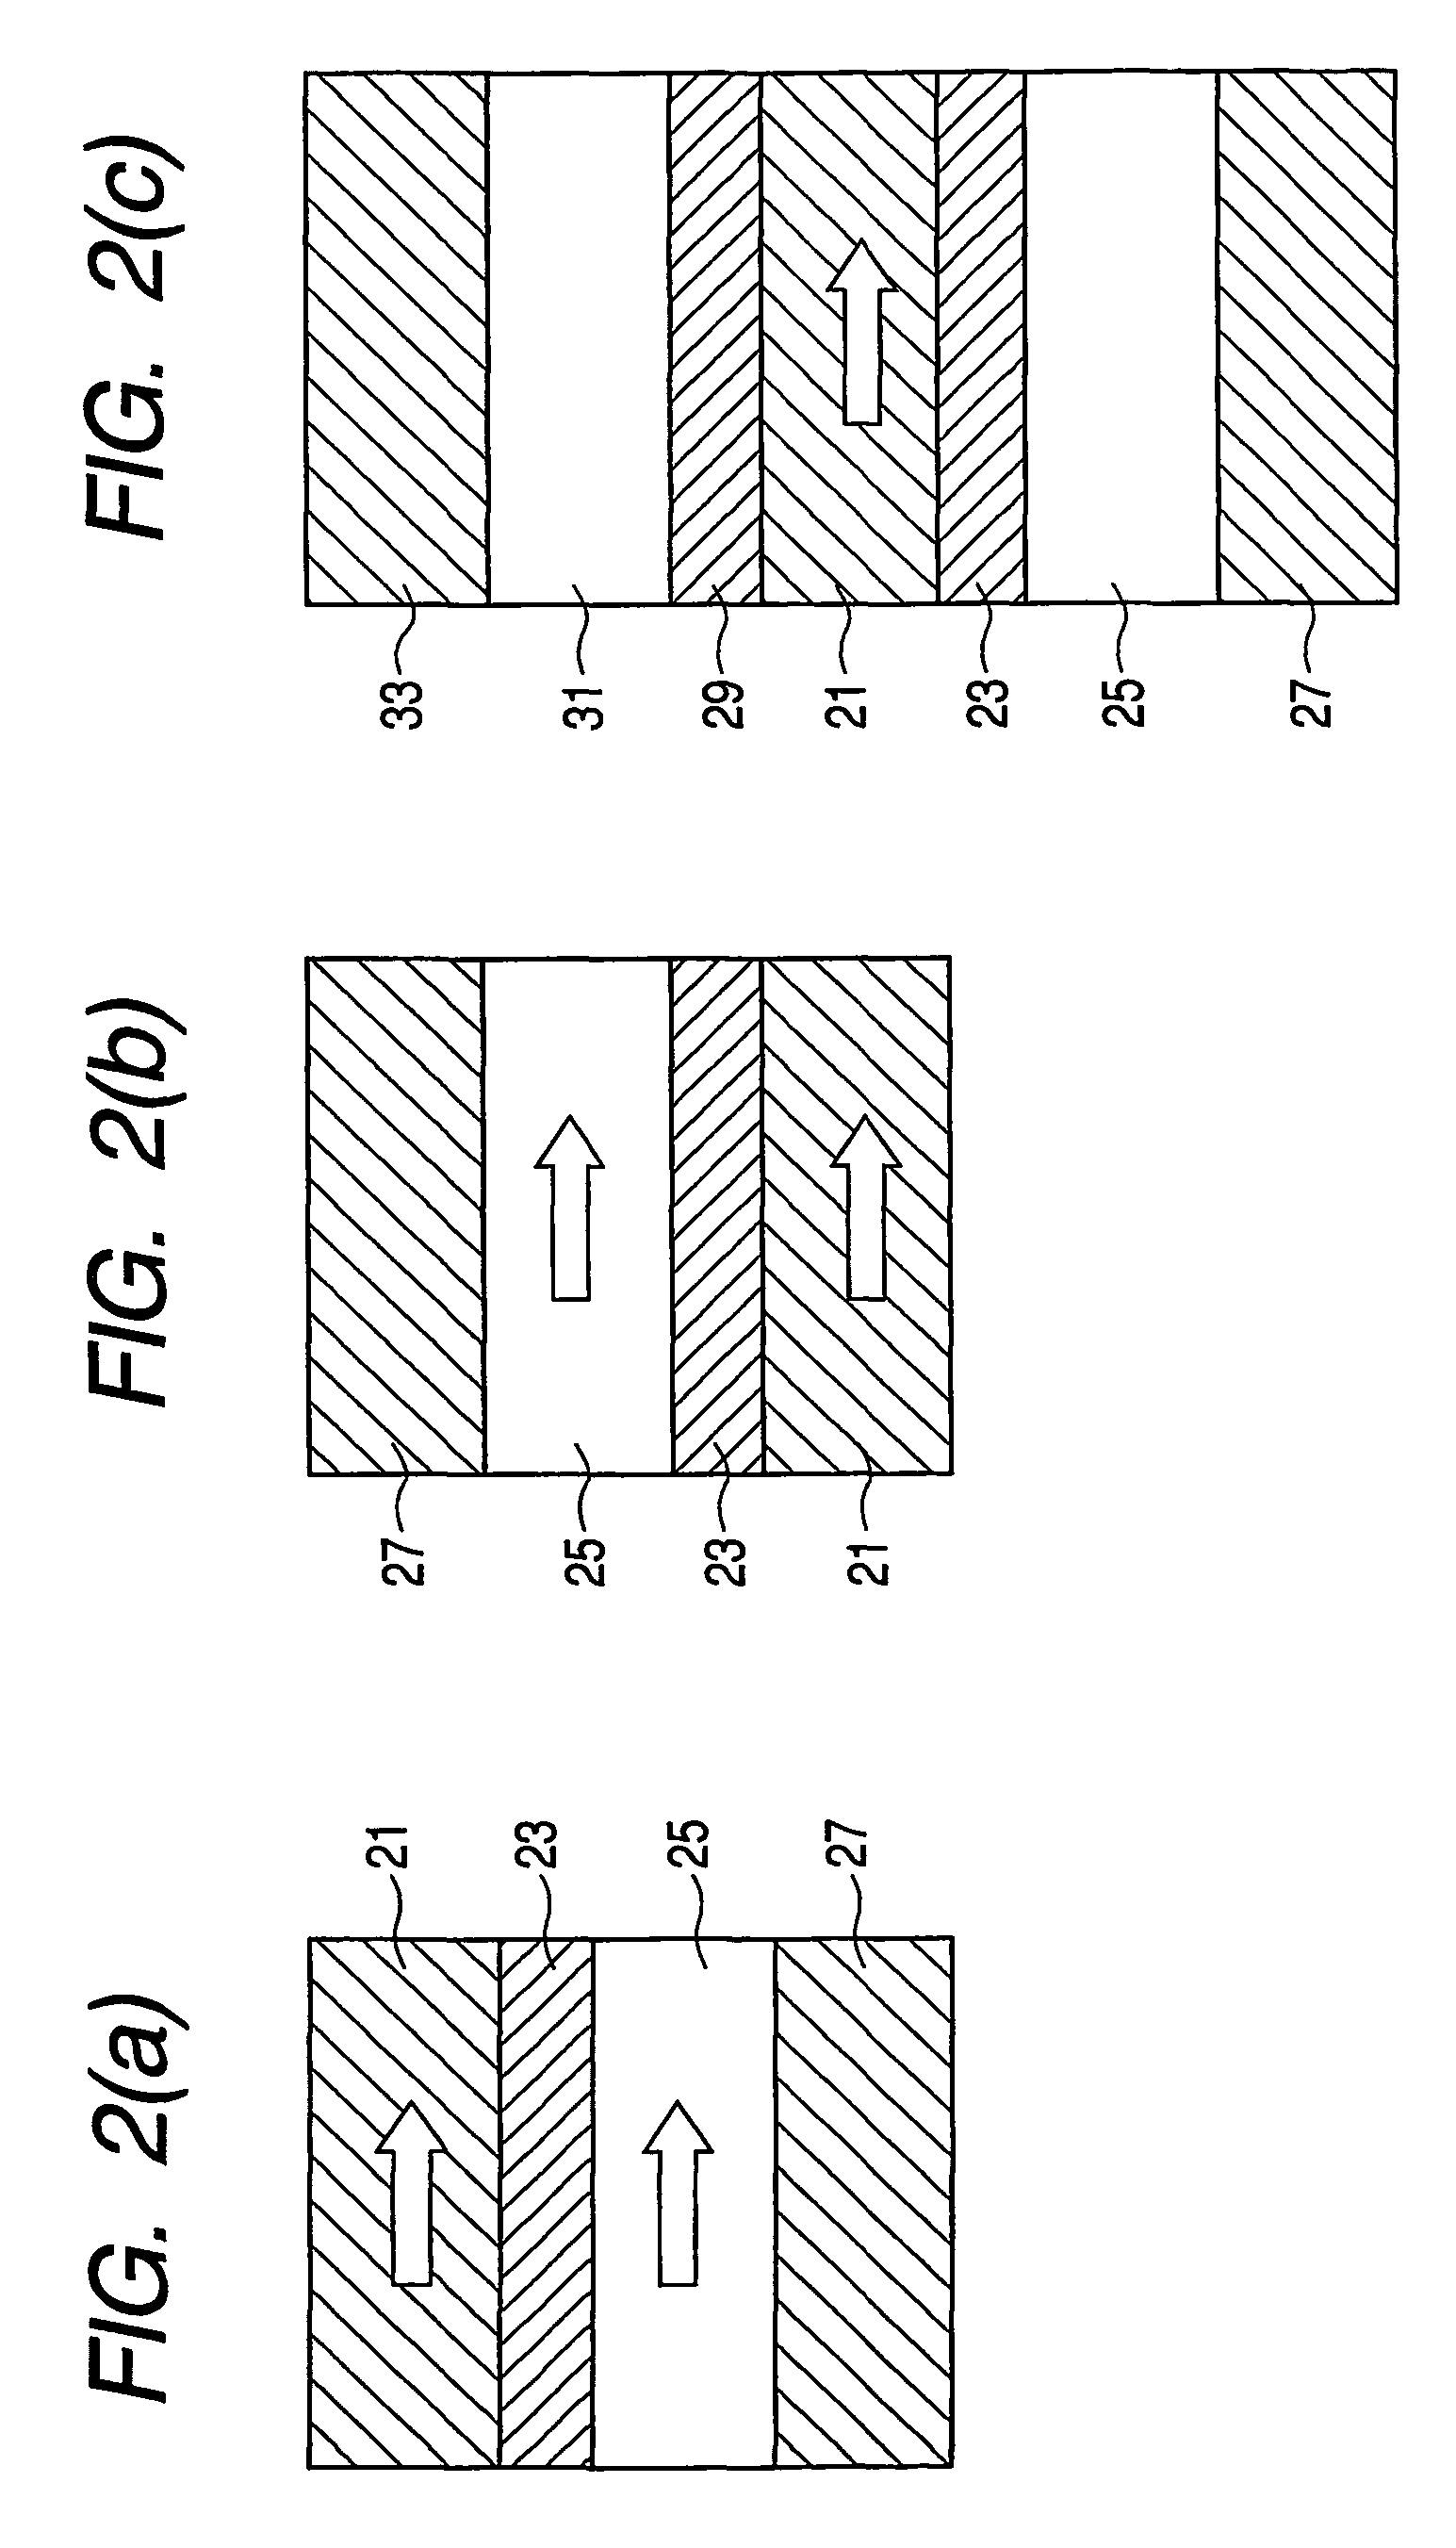 Composite free layer for stabilizing magnetoresistive head